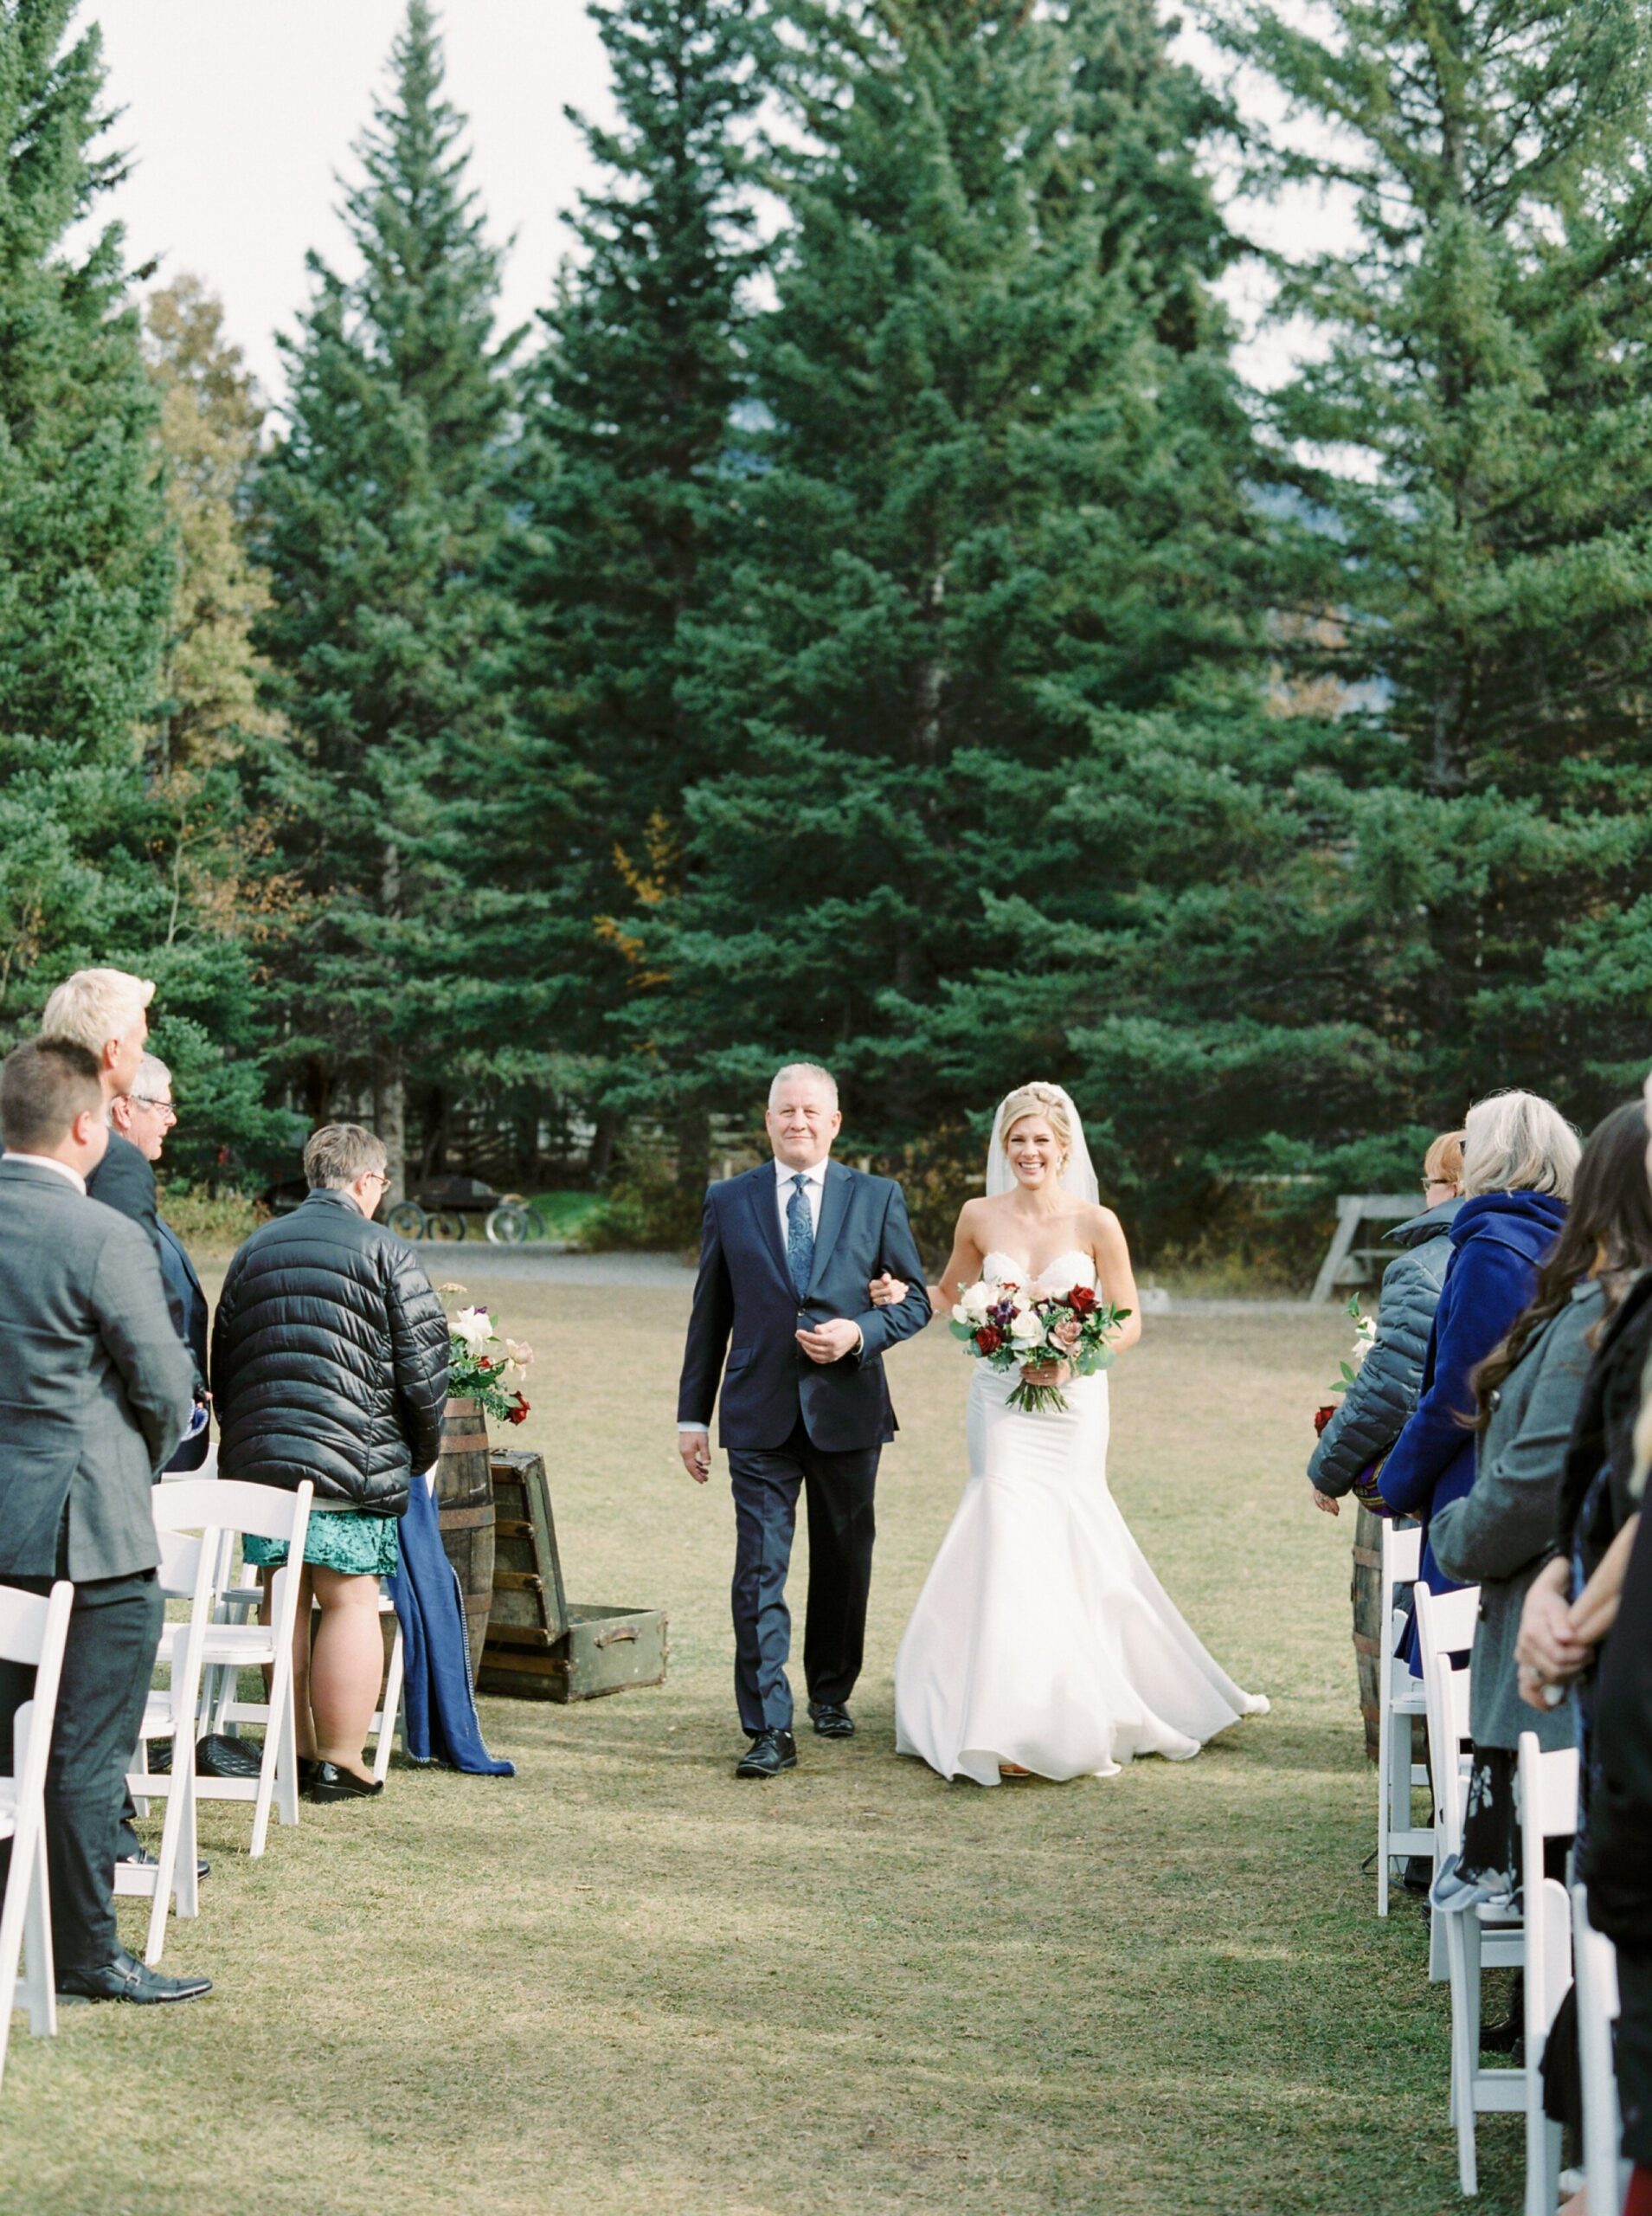  Outdoor mountain ceremony with a triangle floral arch | Cornerstone Theater & Canmore Ranch Wedding Photographers 